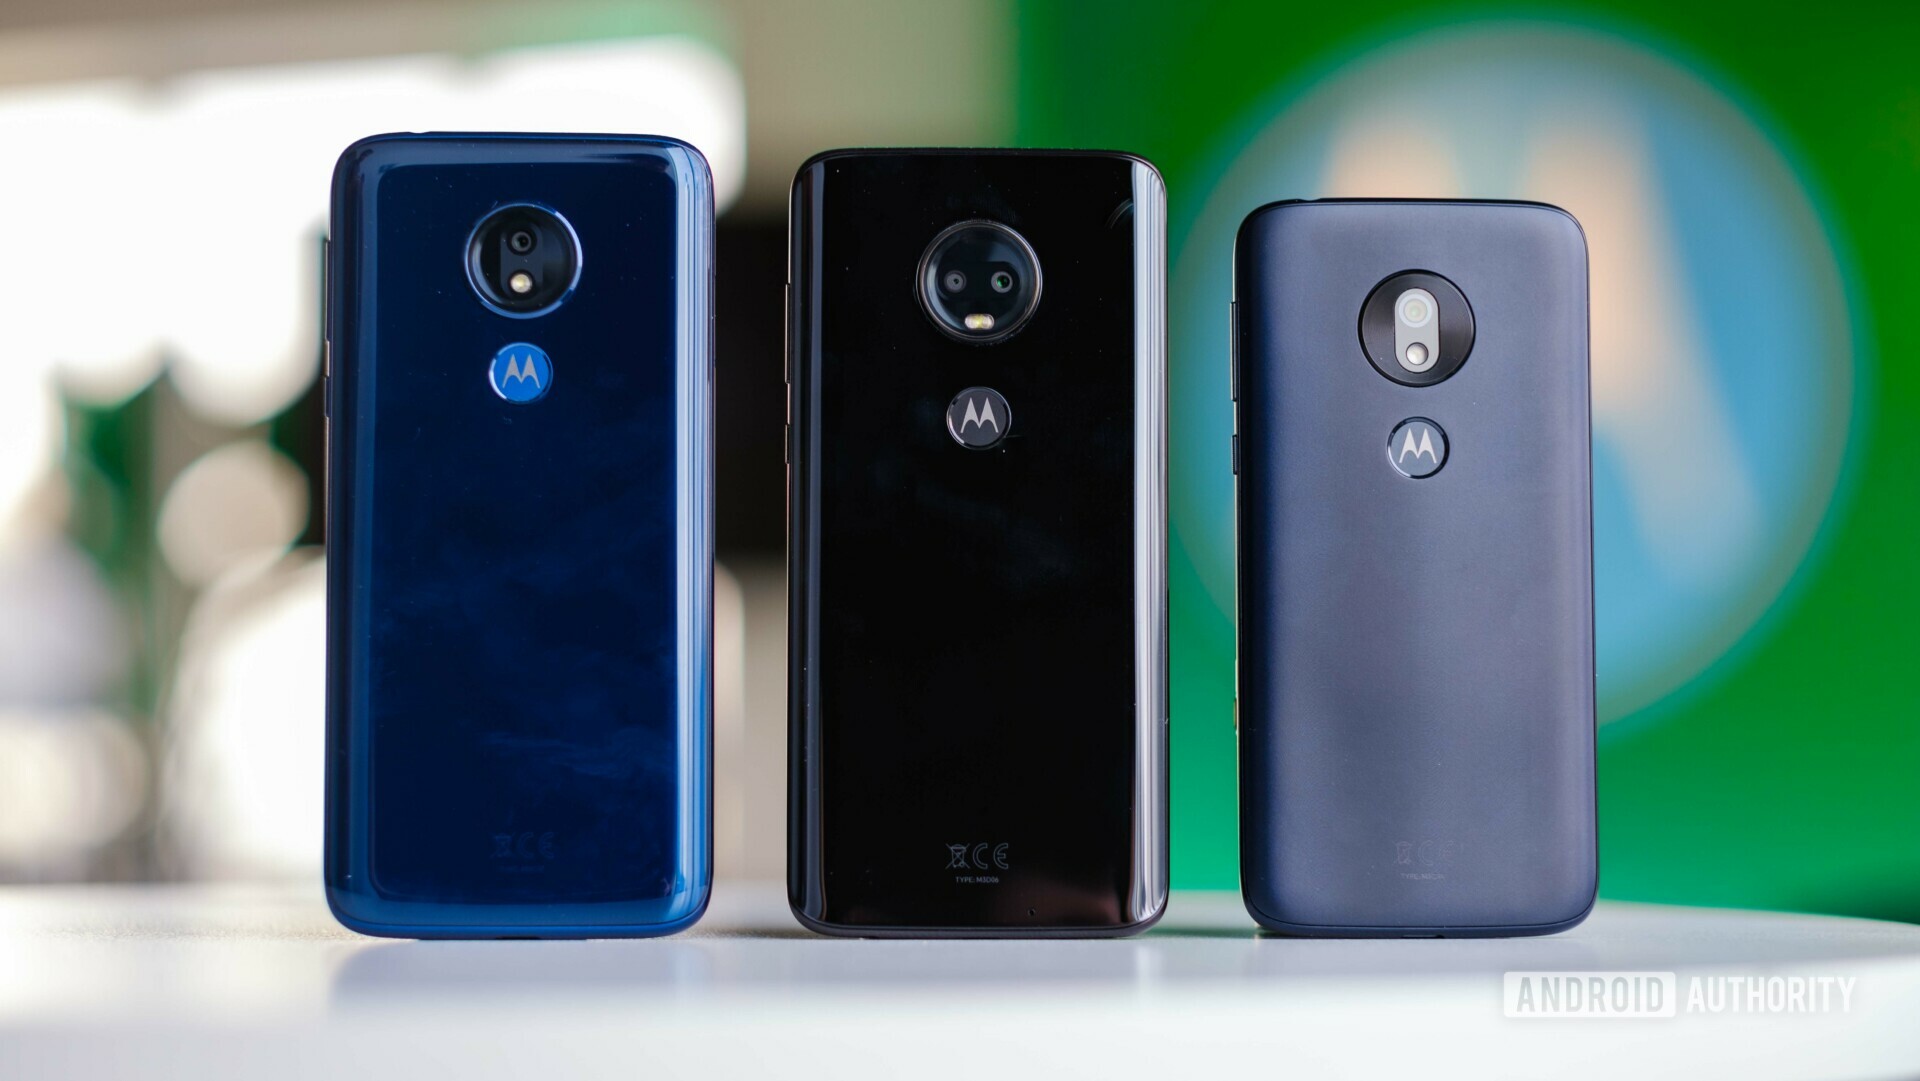 The Moto G7 family stand upright shot from behind.